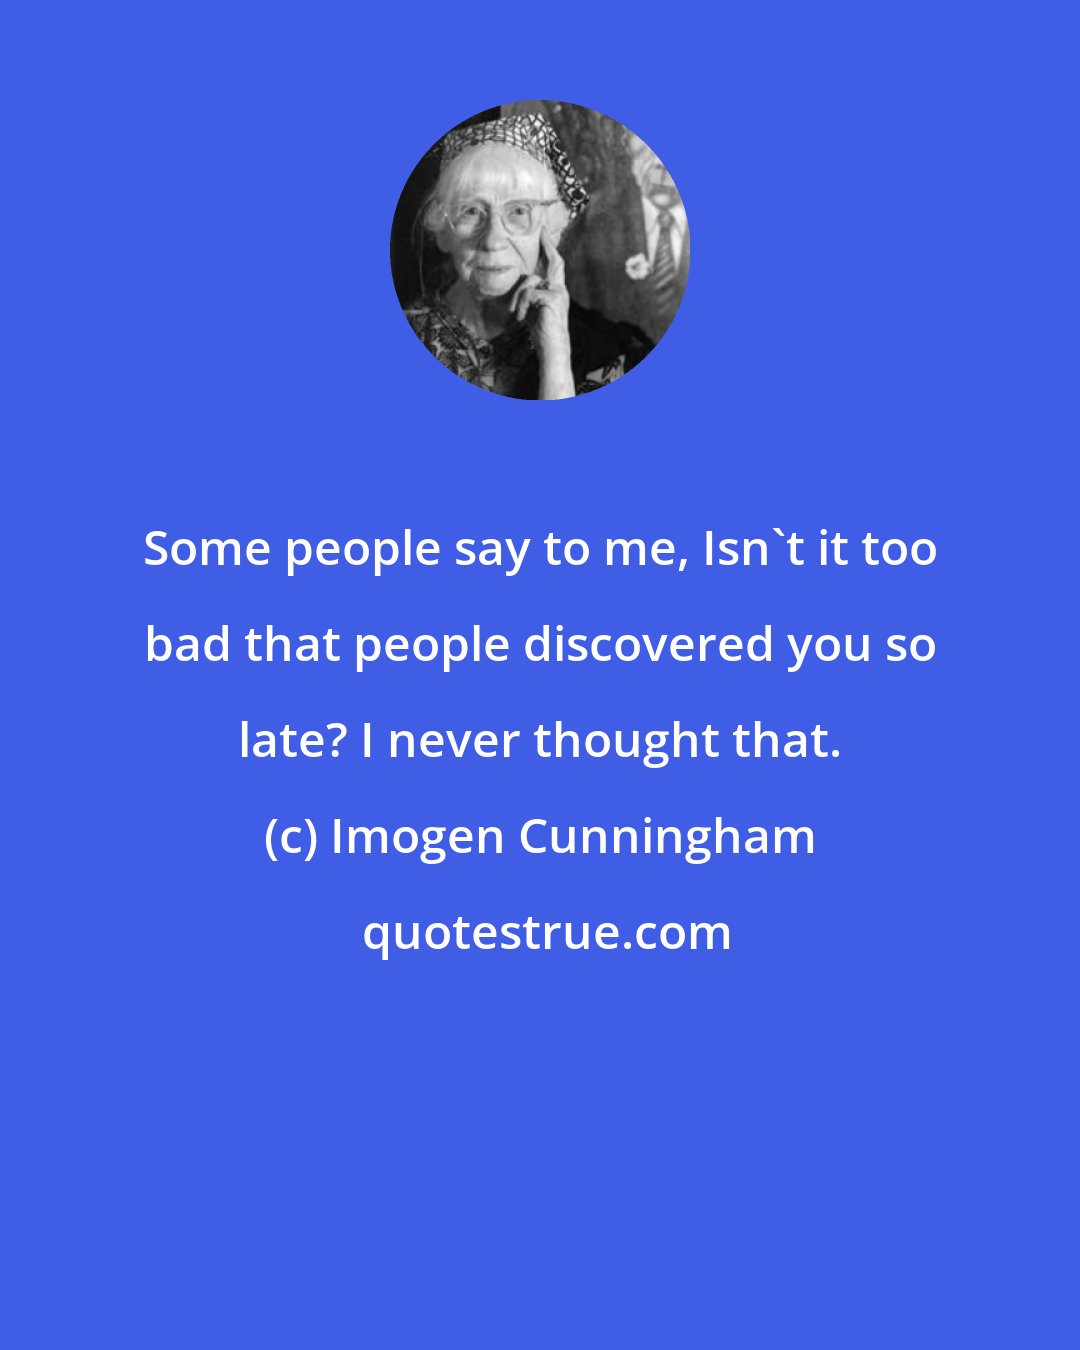 Imogen Cunningham: Some people say to me, Isn't it too bad that people discovered you so late? I never thought that.